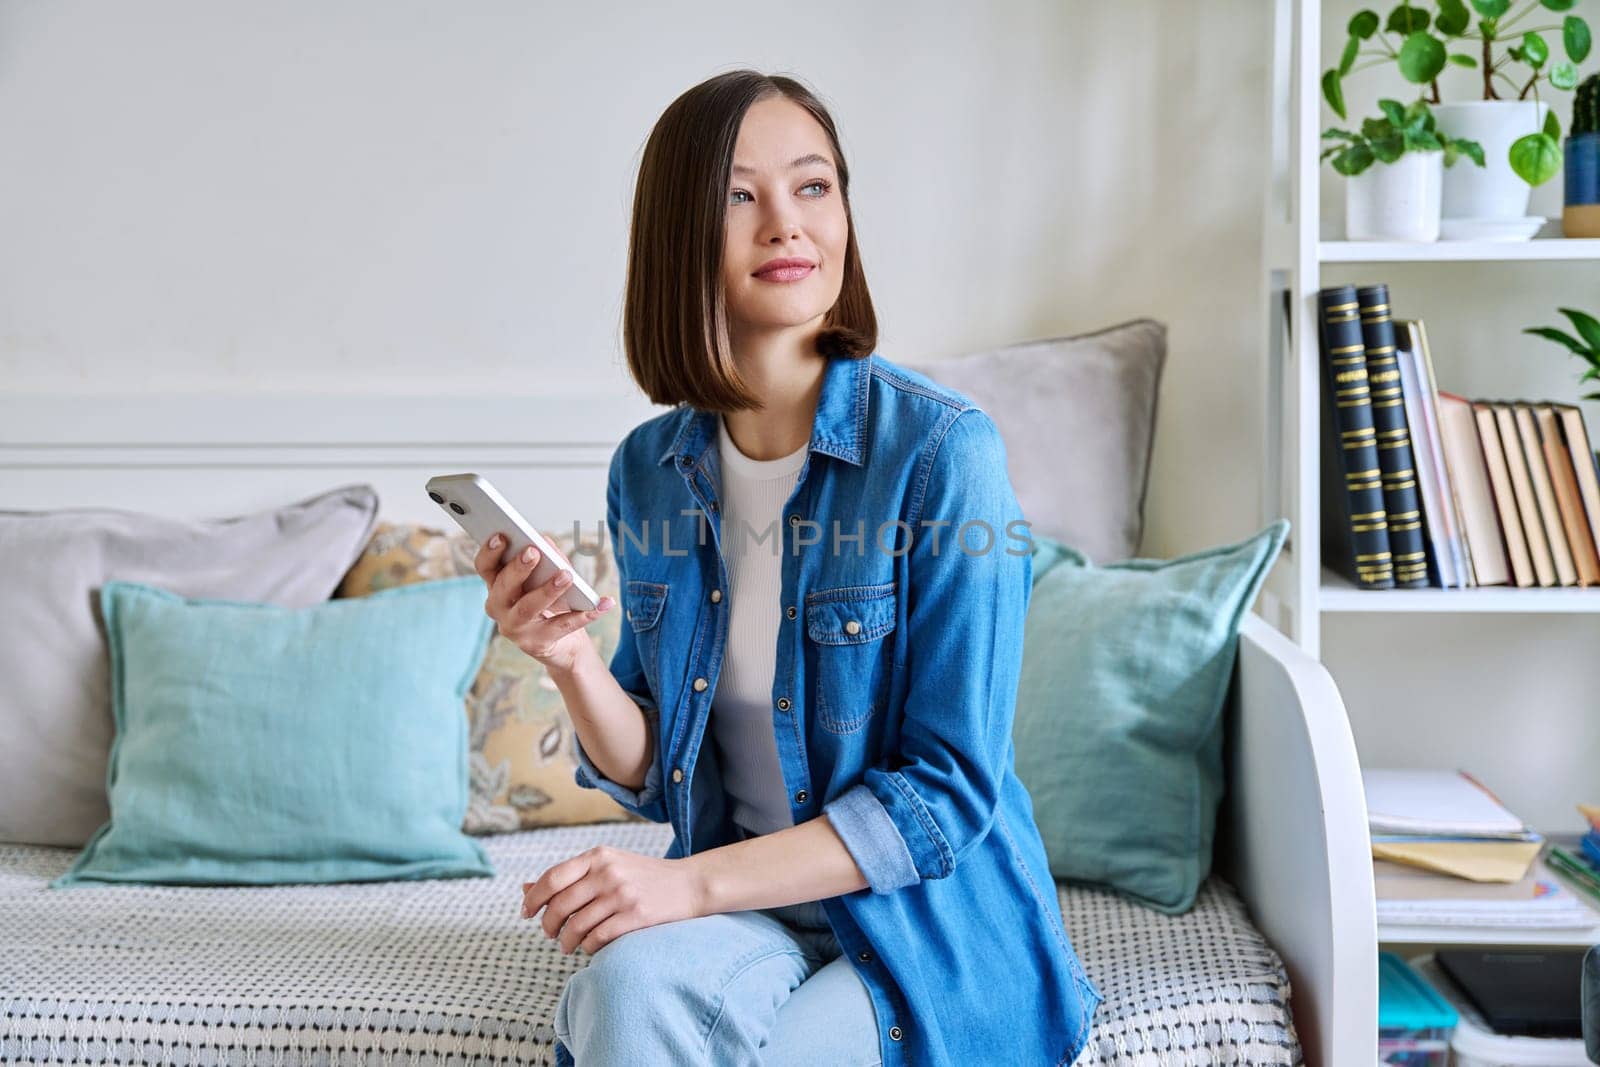 Young woman using smartphone sitting on couch at home. Female texting reading looking, mobile applications technology internet online services for work study leisure communication shopping lifestyle